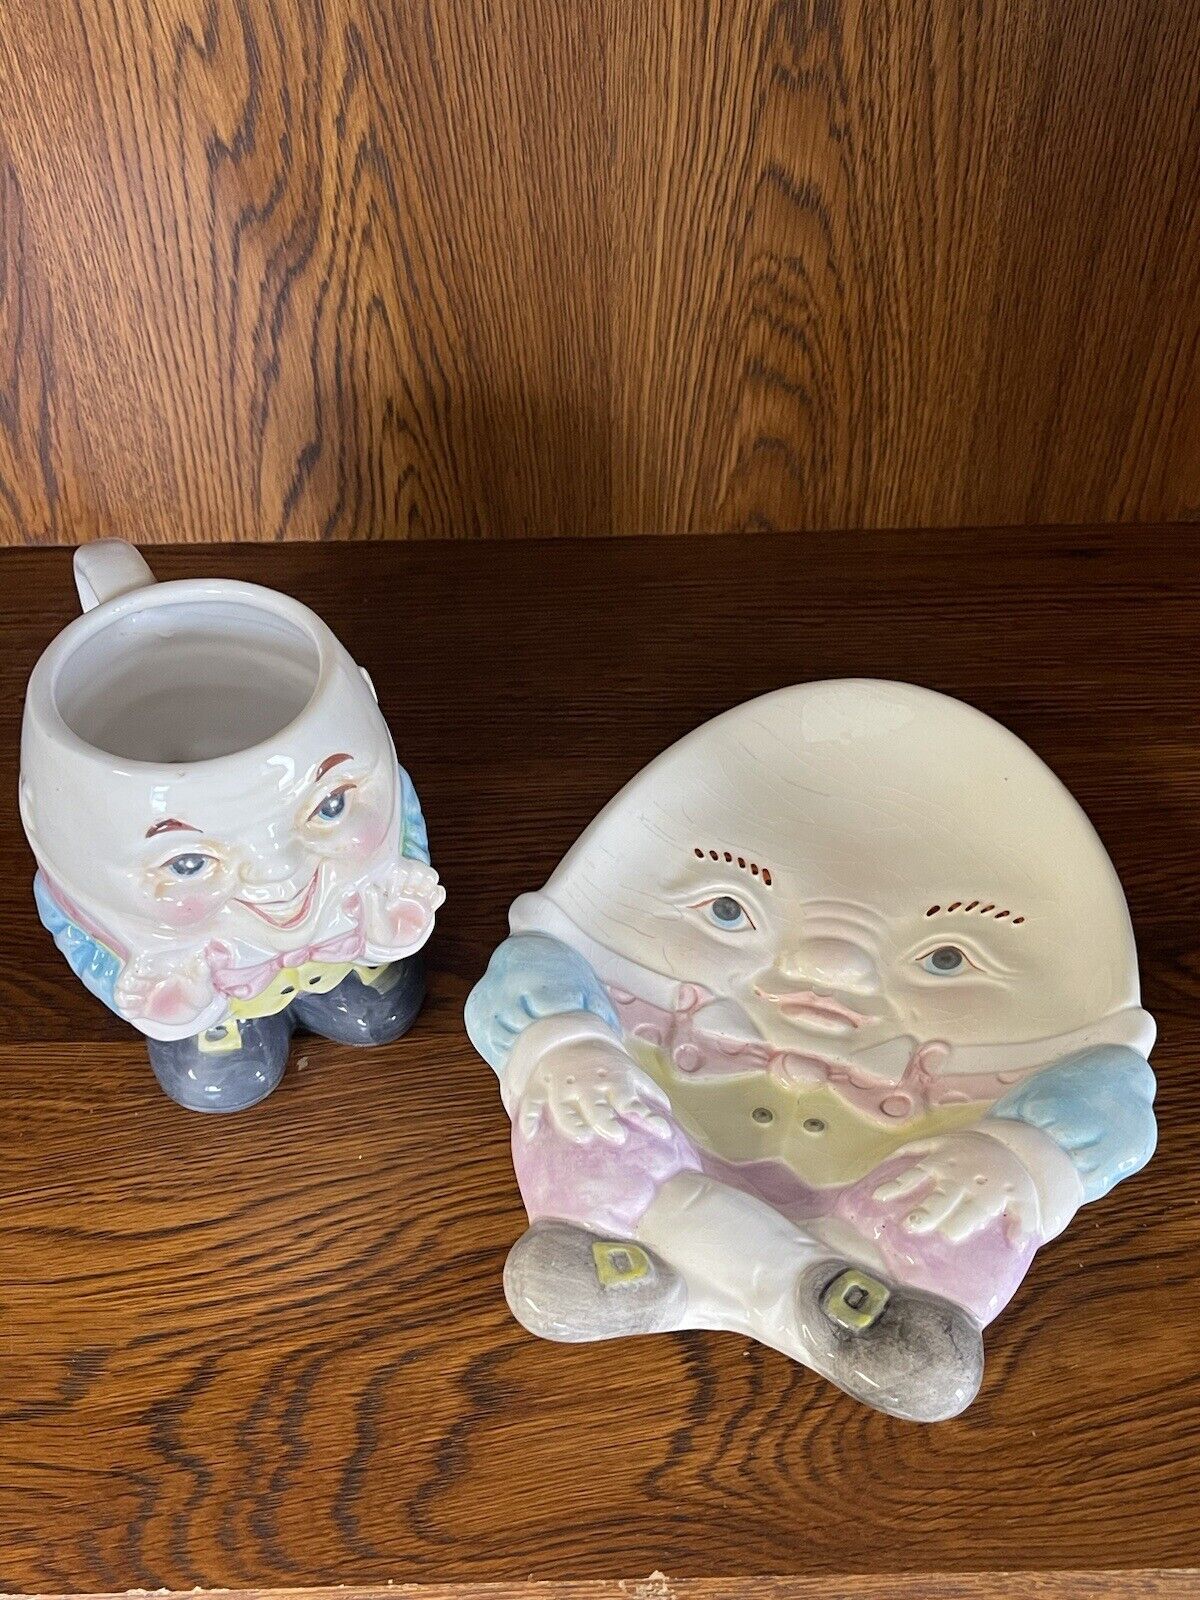 Vintage Humpty Dumpty Mug And Plate Set Anthropomorphic Hand Painted Kitschy